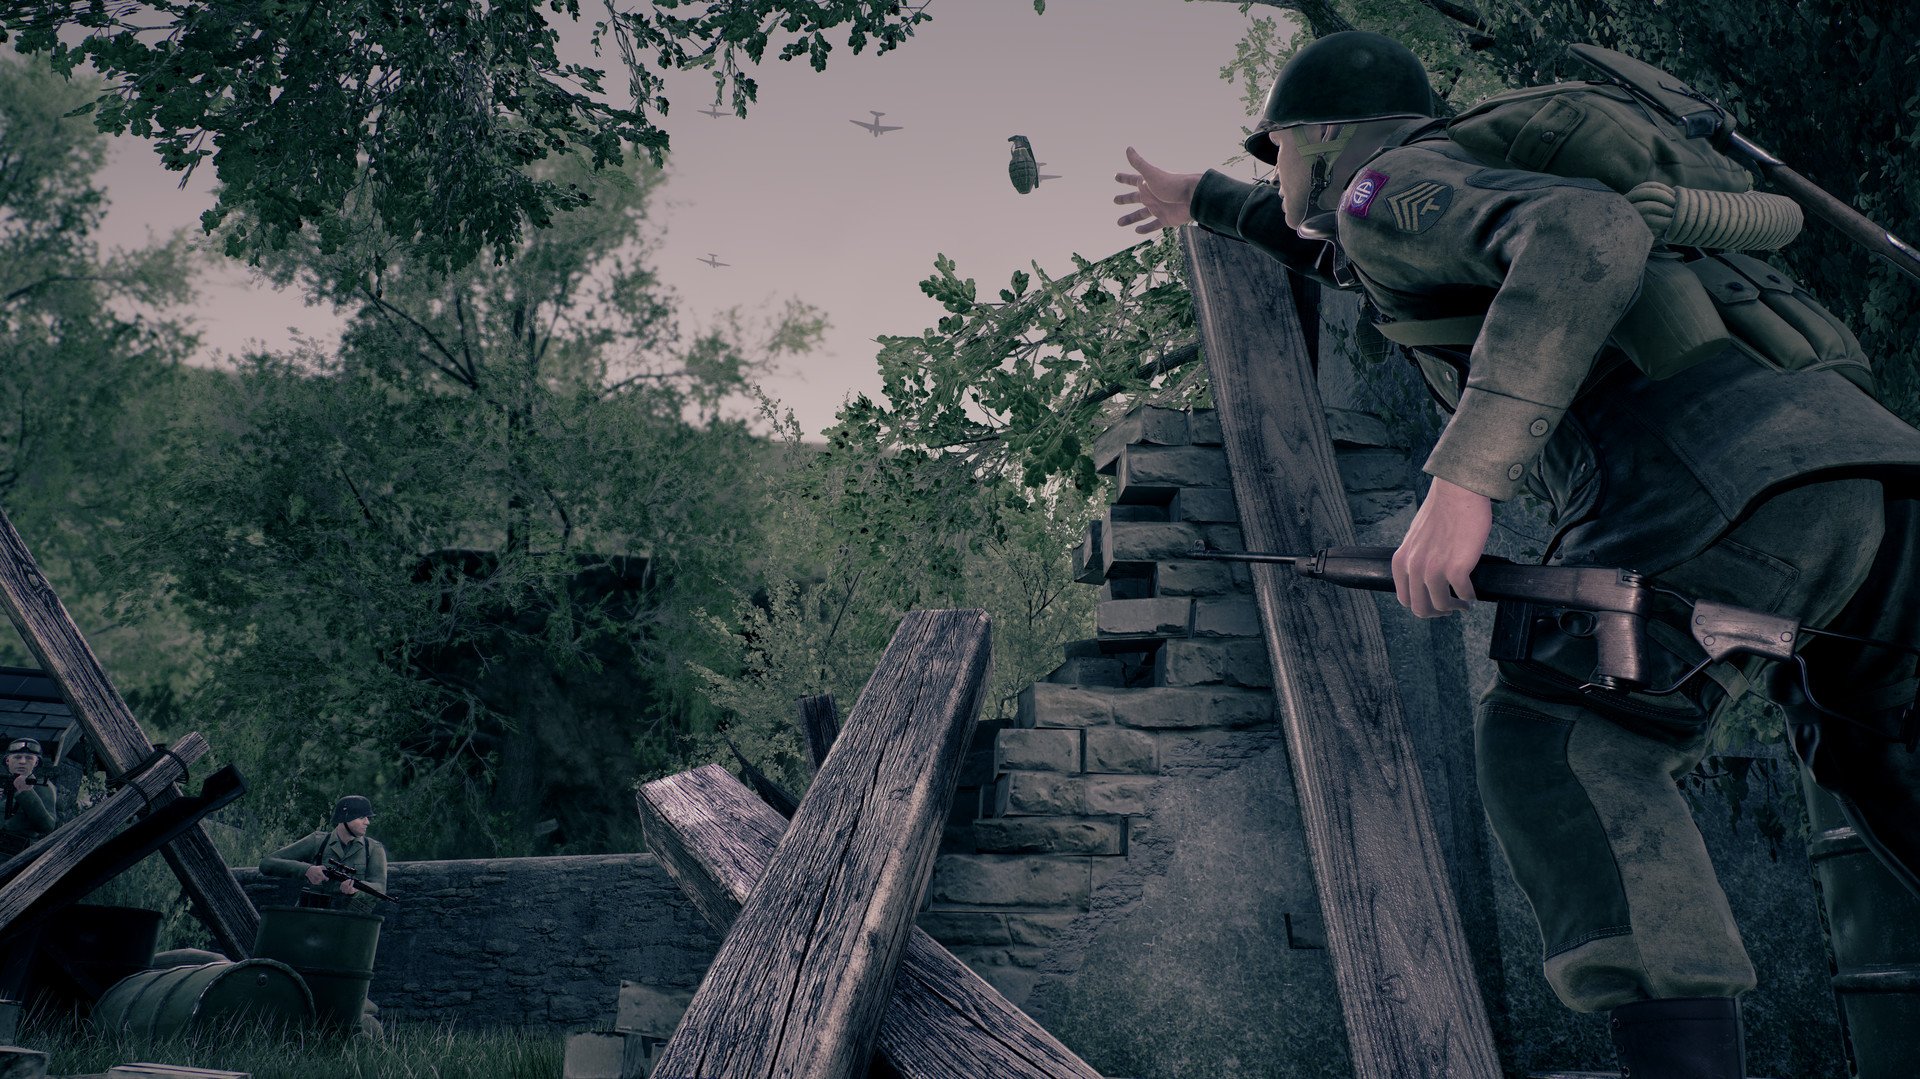 Battalion 1944 Launches On Steam Early Access At 12 P M Et On